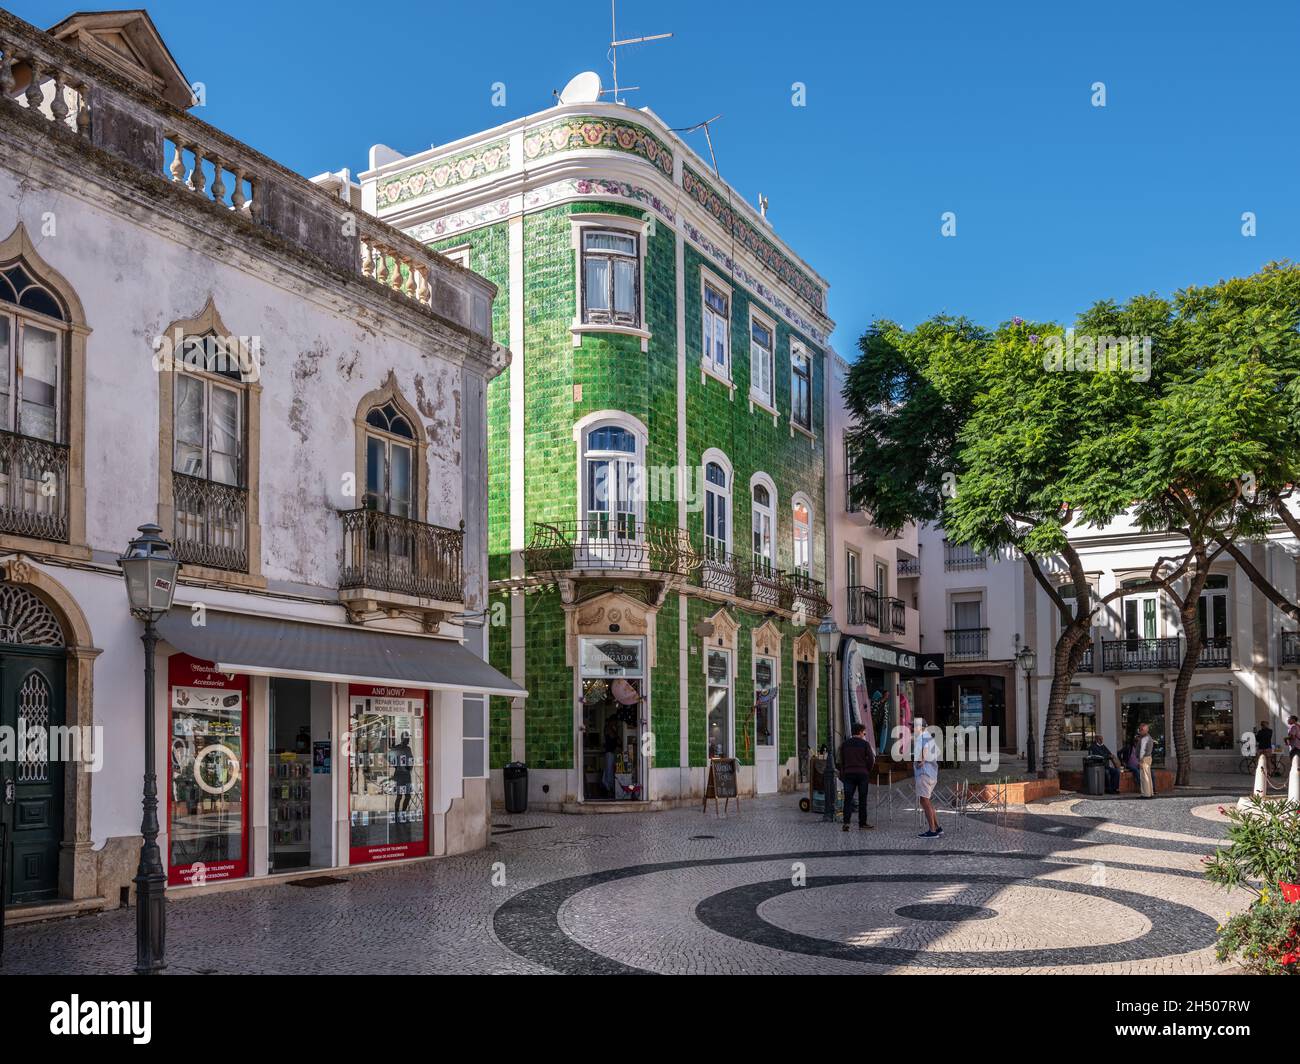 Luis de Camoes square in the heart of Lagos Portugal with famous green tiled building within the historic centre of this algarve town in the morning Stock Photo